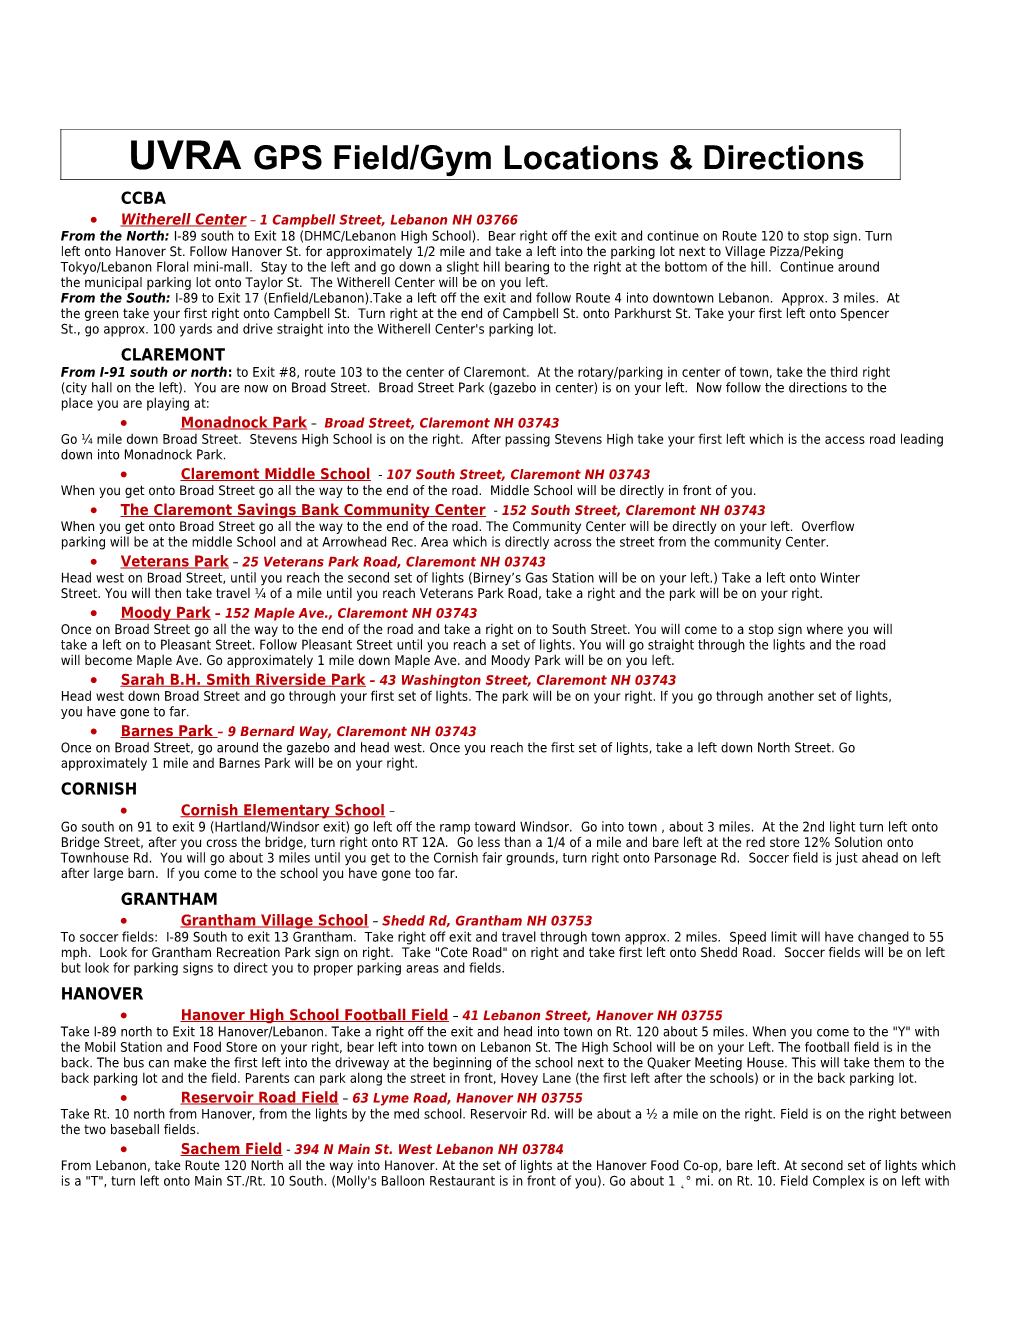 UVRAGPS Field/Gym Locations & Directions